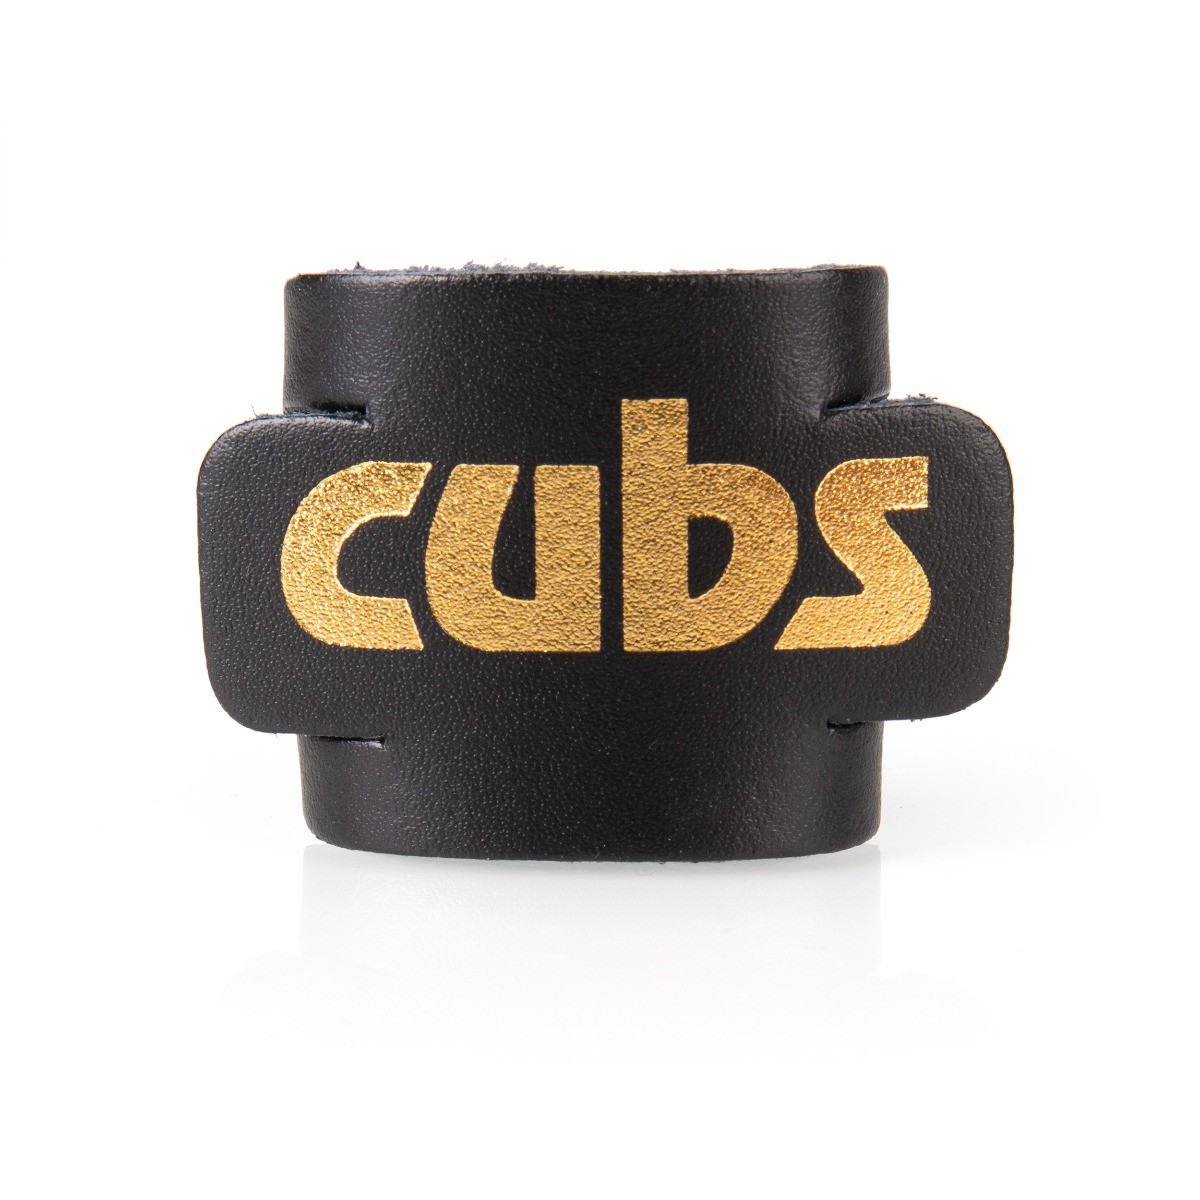 Cubs Scouts Leather Woggle Black